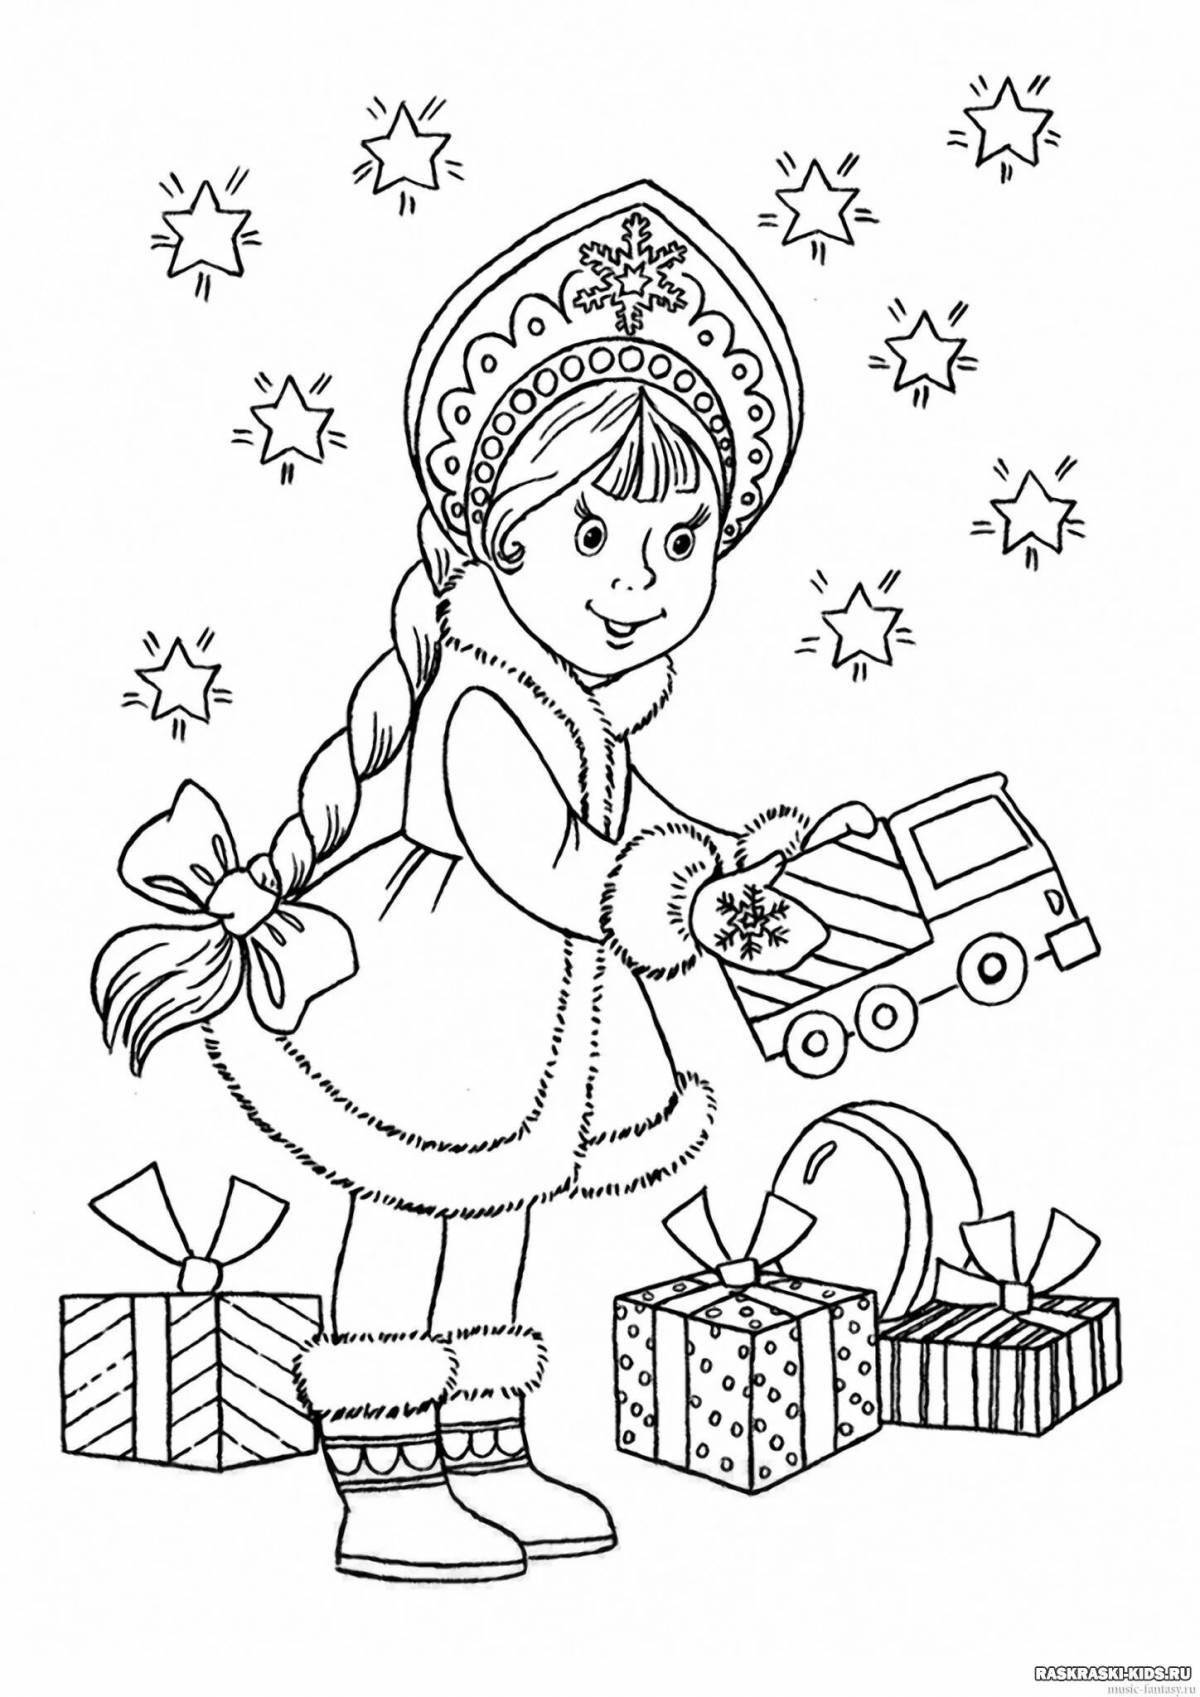 Christmas coloring book for 10 year old girls